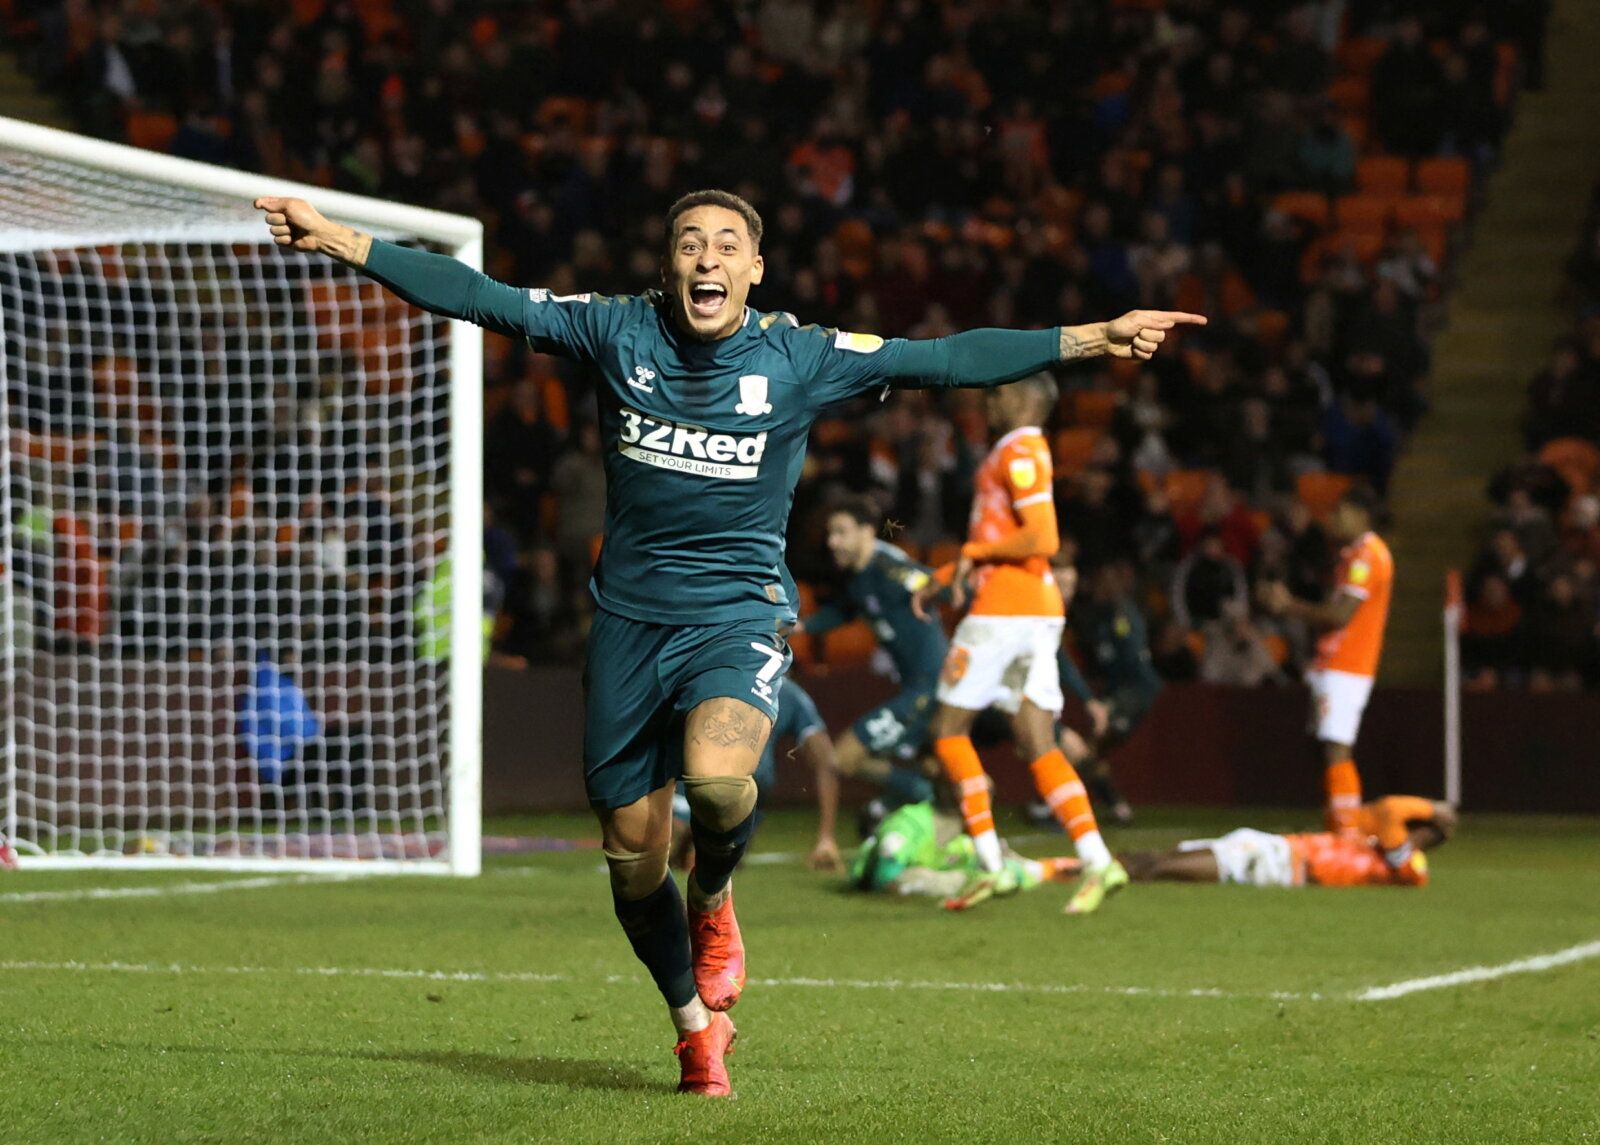 Soccer Football - Championship - Blackpool v Middlesbrough - Bloomfield Road, Blackpool, Britain - December 29, 2021  Middlesbrough's Marcus Tavernier celebrates after Duncan Watmore scored their second goal  Action Images/Molly Darlington    EDITORIAL USE ONLY. No use with unauthorized audio, video, data, fixture lists, club/league logos or 